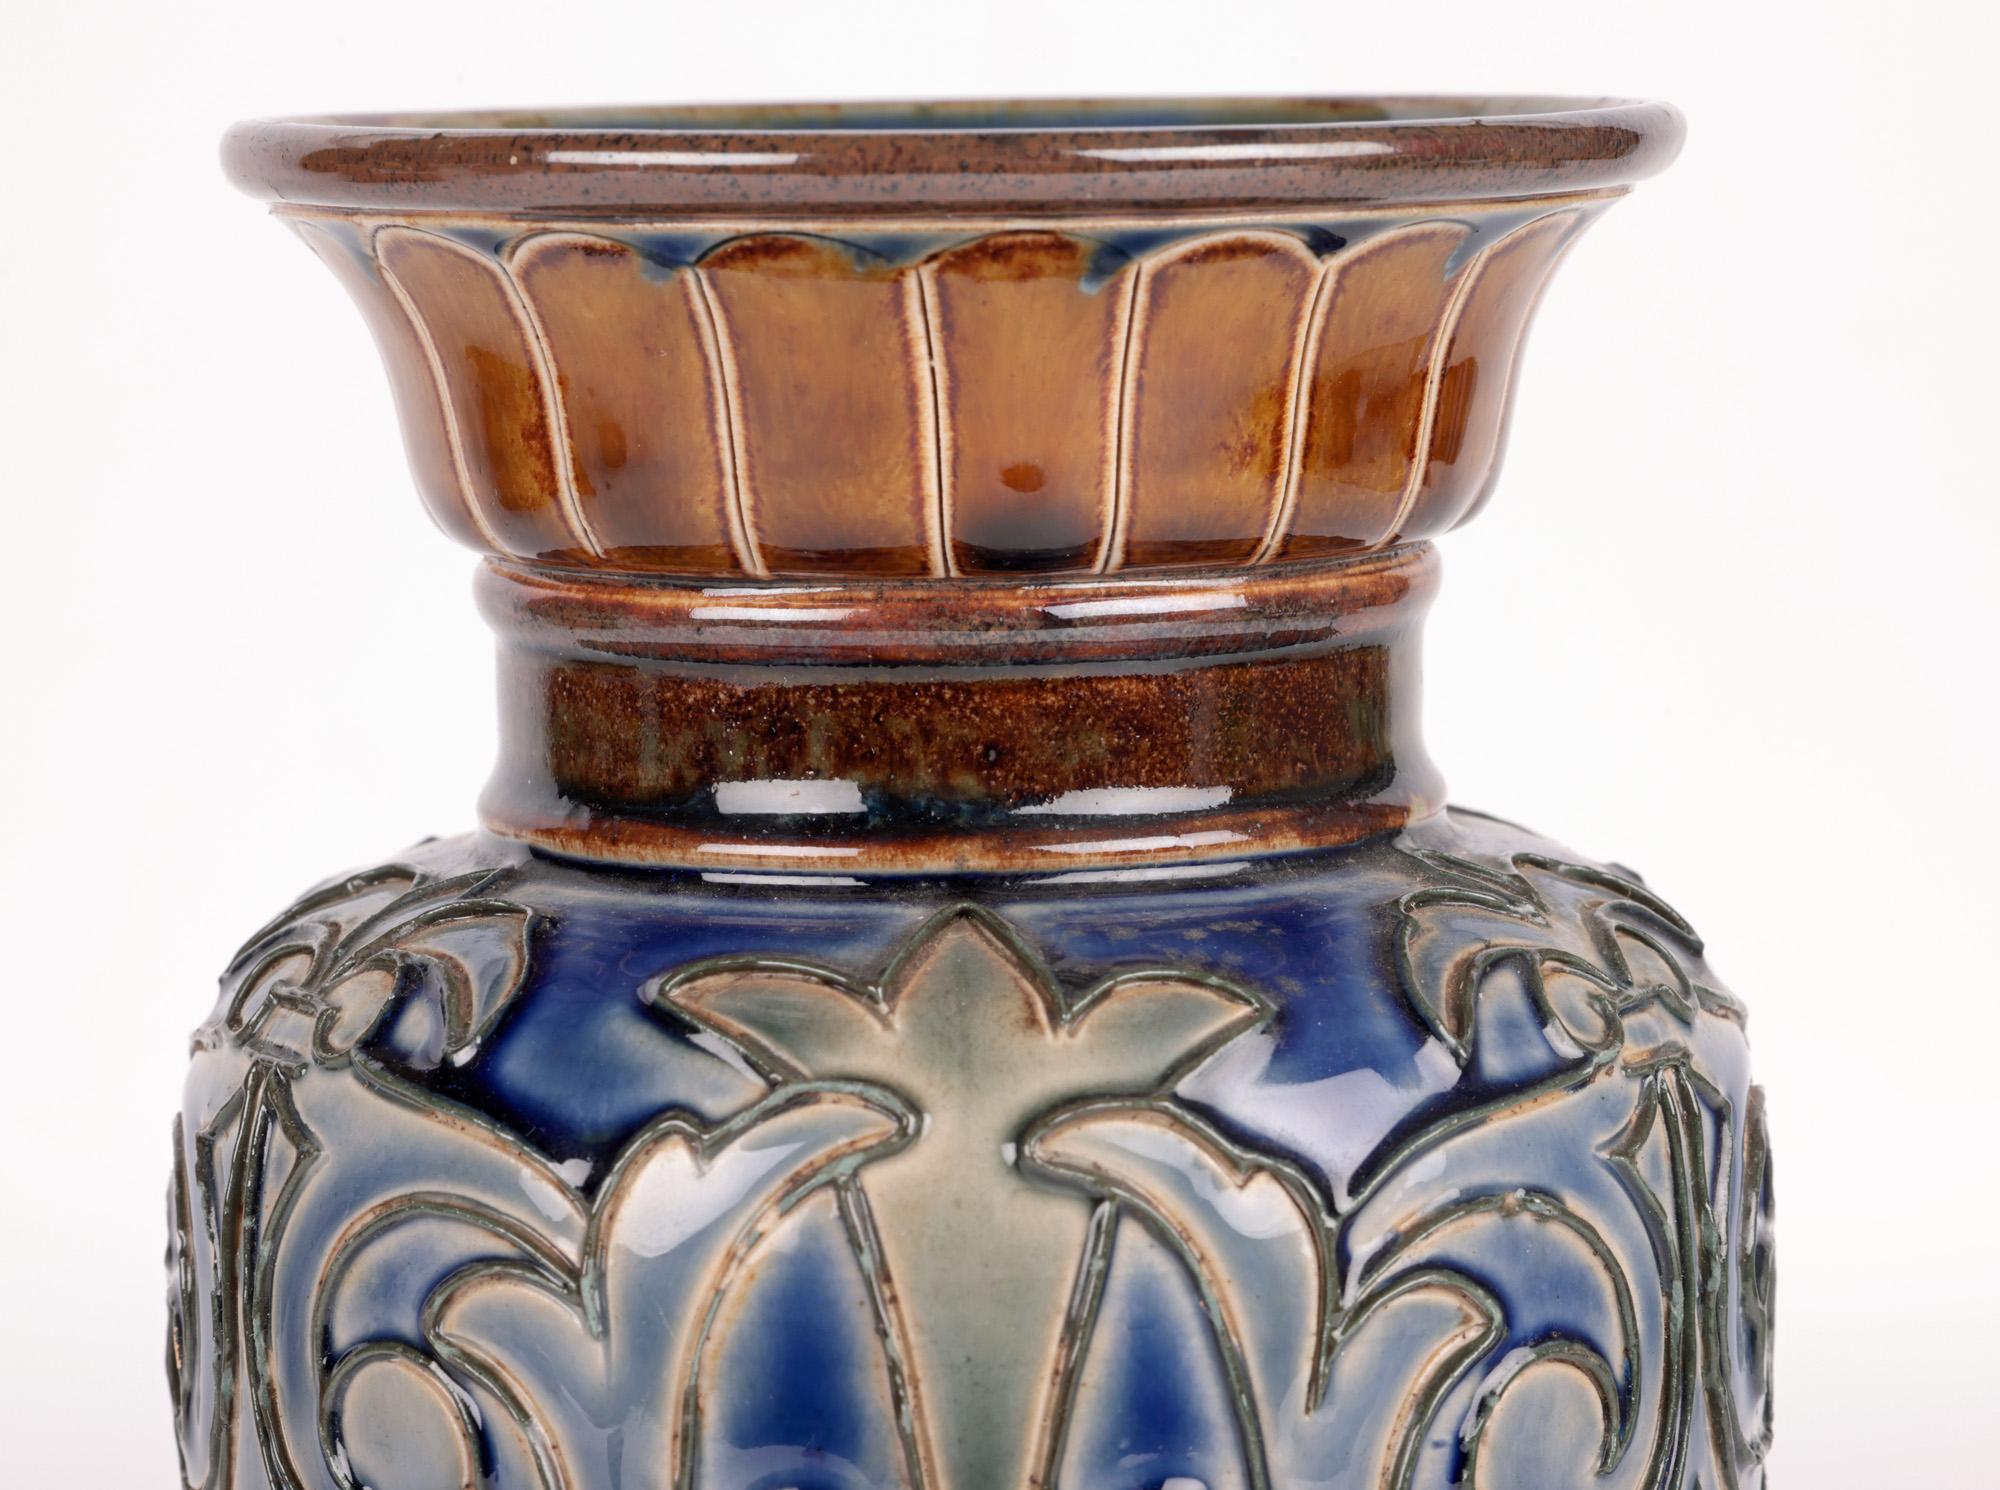 A very stylish Aesthetic Movement Doulton Lambeth tube lined stylized floral vase by renowned designer and decorator Eliza Simmance dated 1884. The tall stoneware vase stands raised on a raised shaped round pedestal base decorated with incised petal